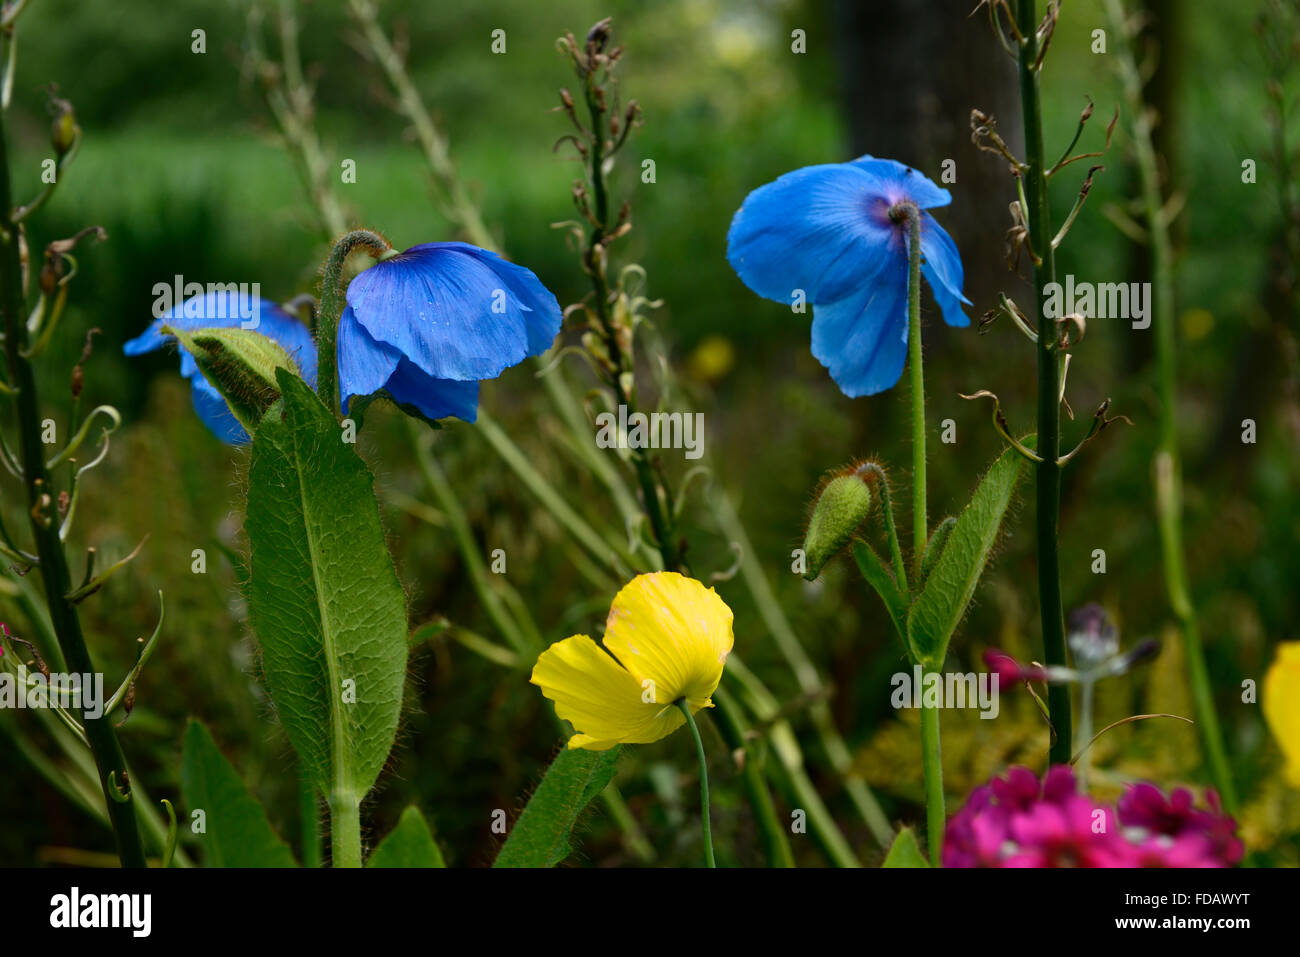 meconopsis cambrica grandis blue yellow poppy poppies spring flower flowers garden gardening RM Floral Stock Photo